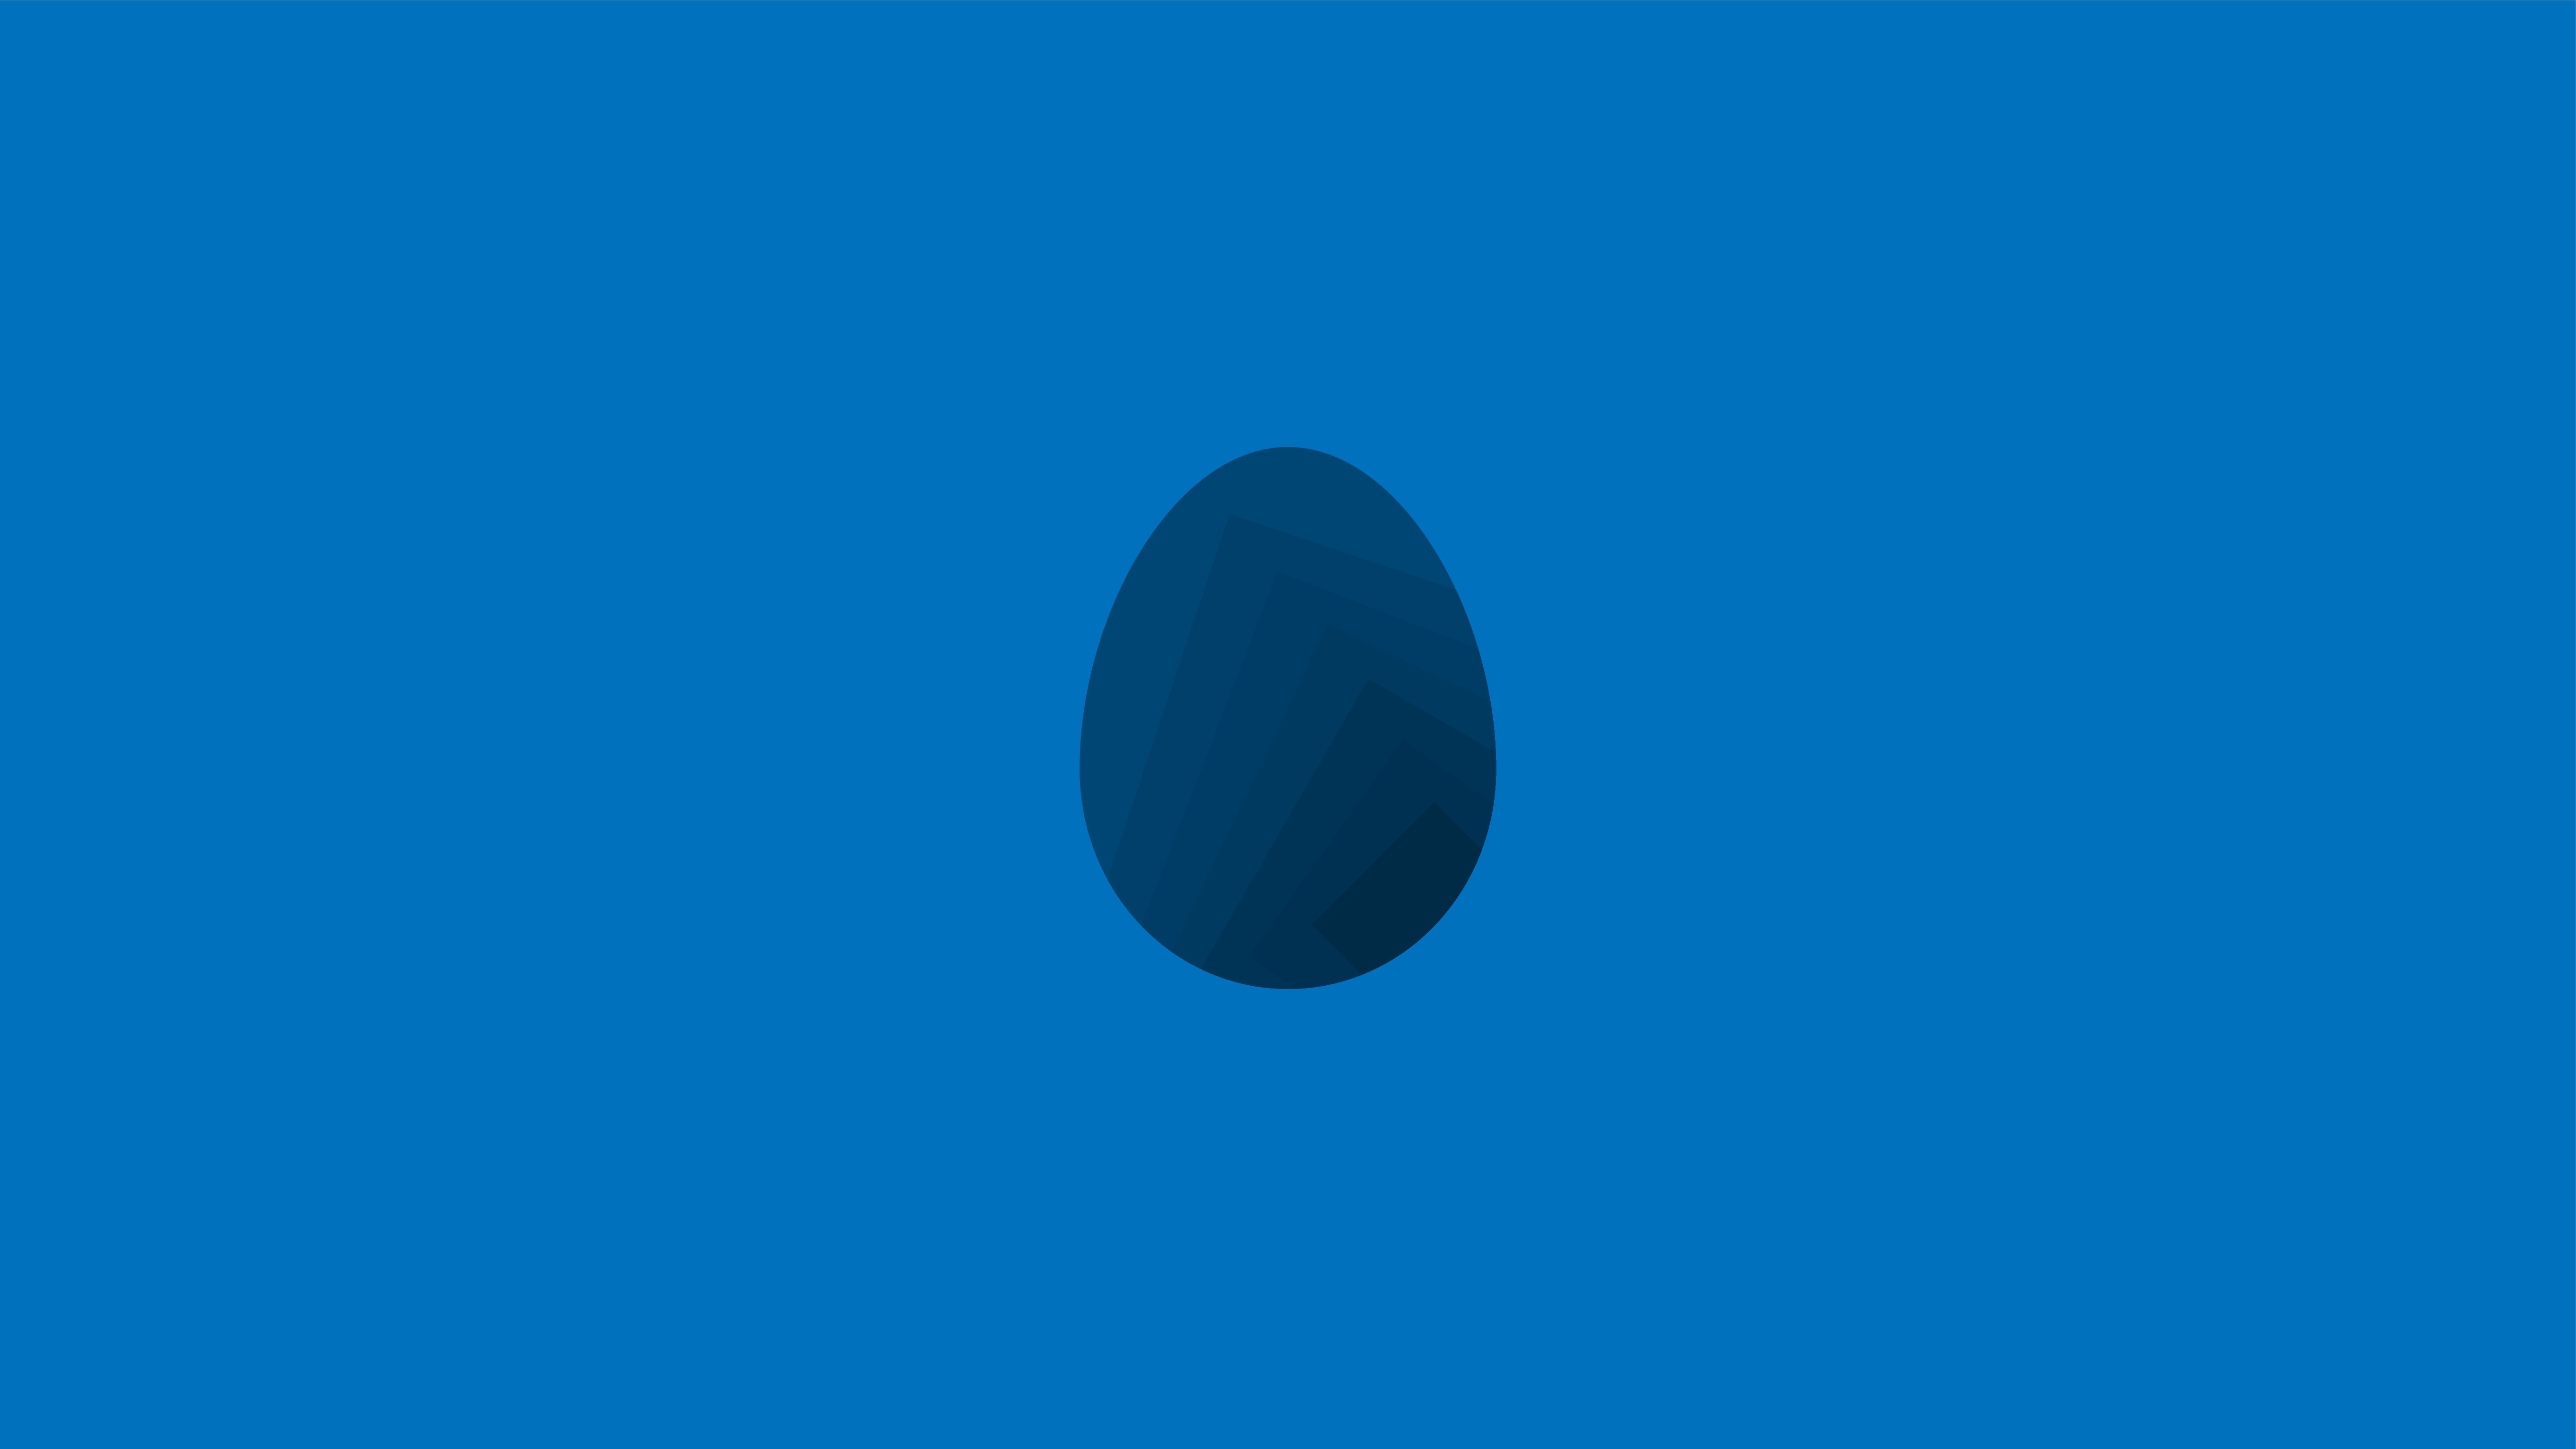 eggs, Minimalism, Selective coloring, Cold, Blue, Blue background Wallpaper